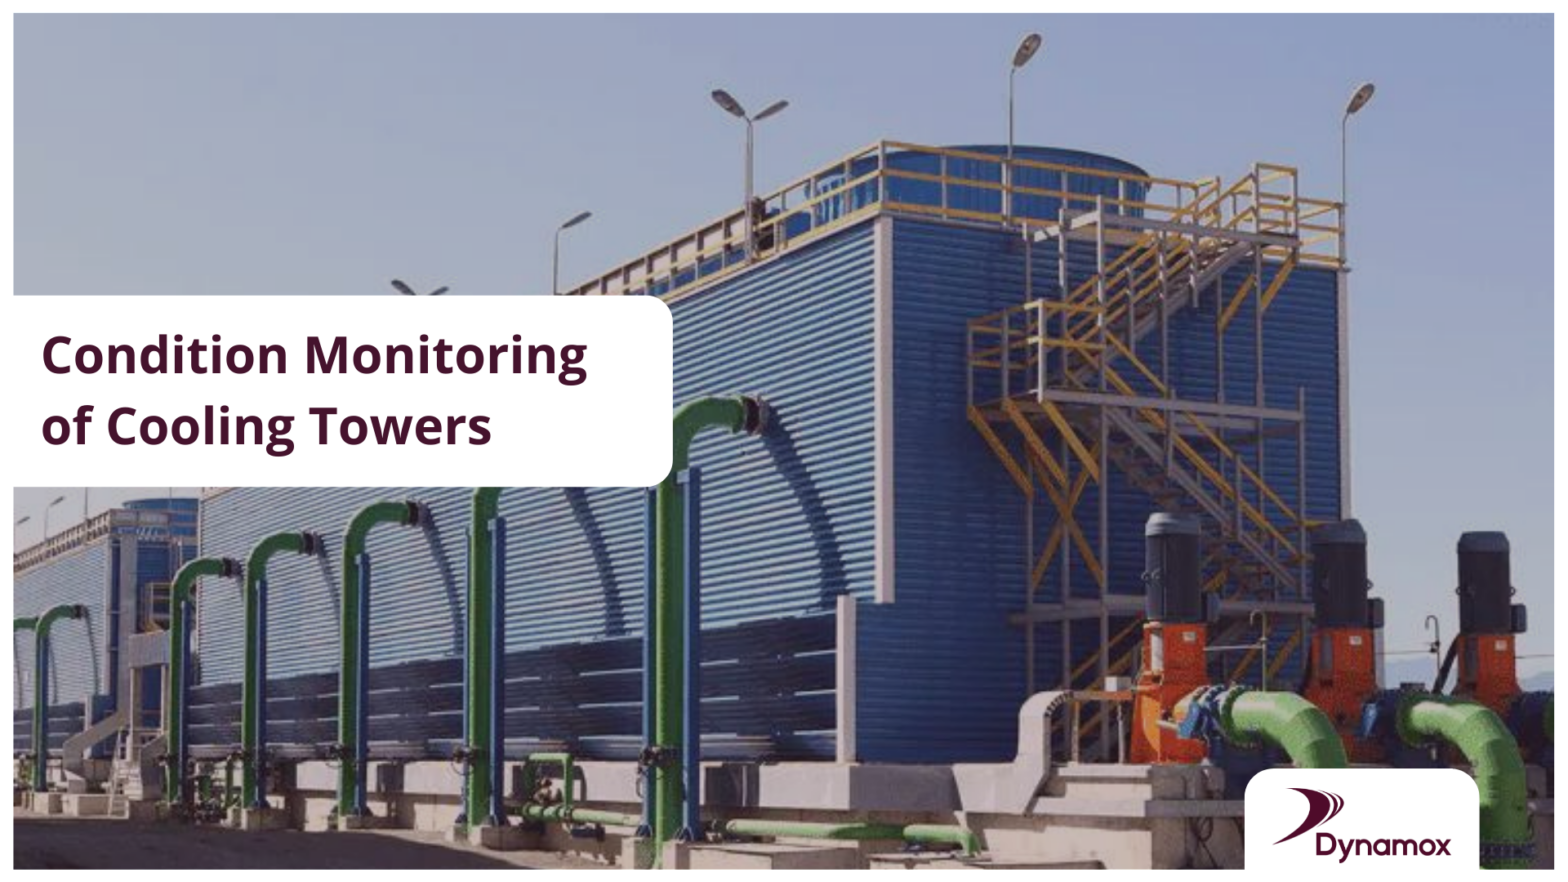 Condition Monitoring of Cooling Towers